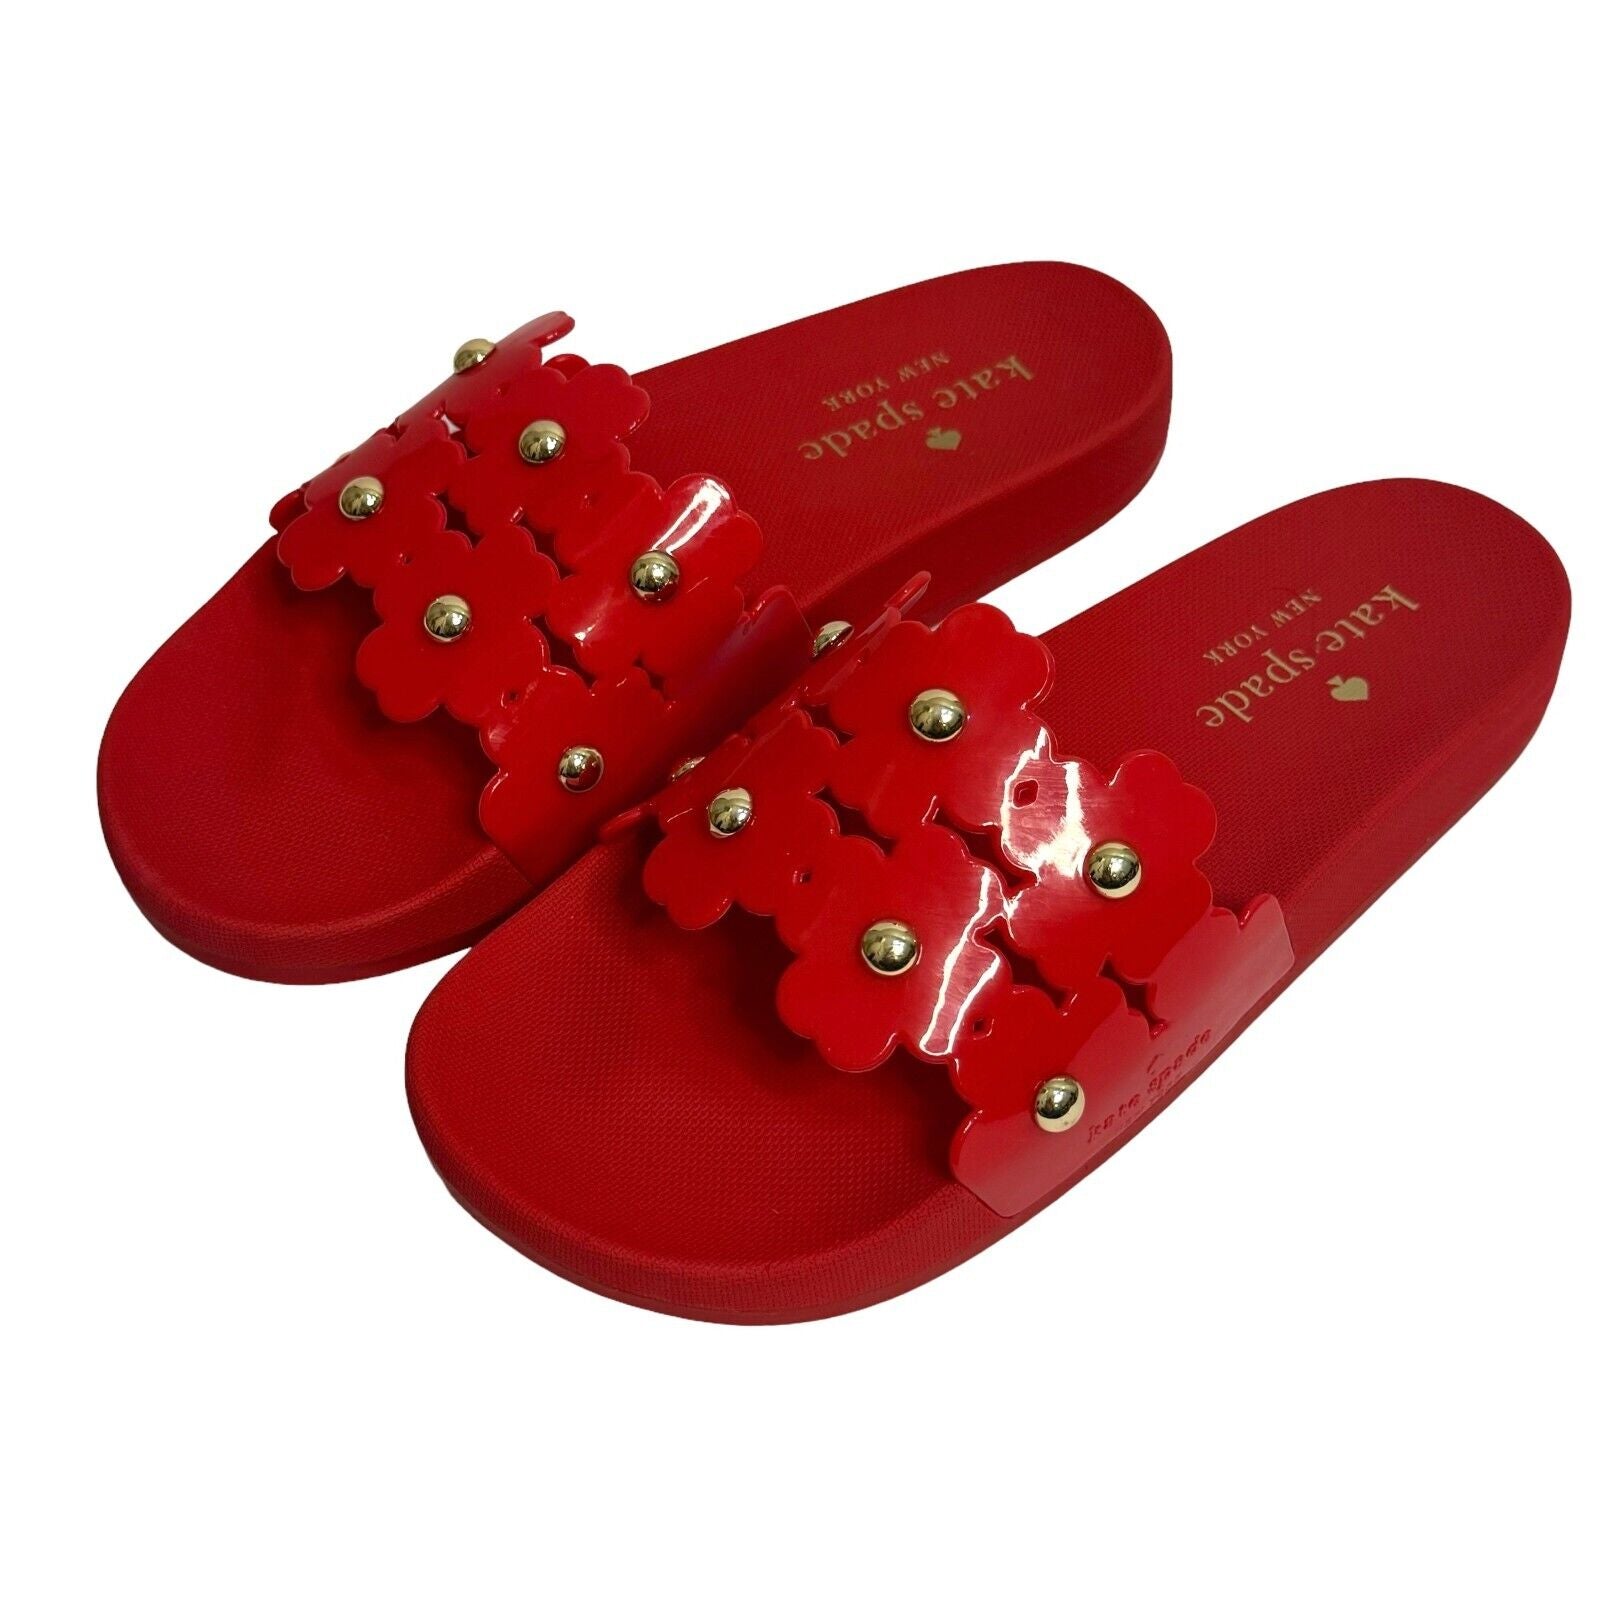 Kate Spade Red Daisy Pool Slide Size 8 NEW $129